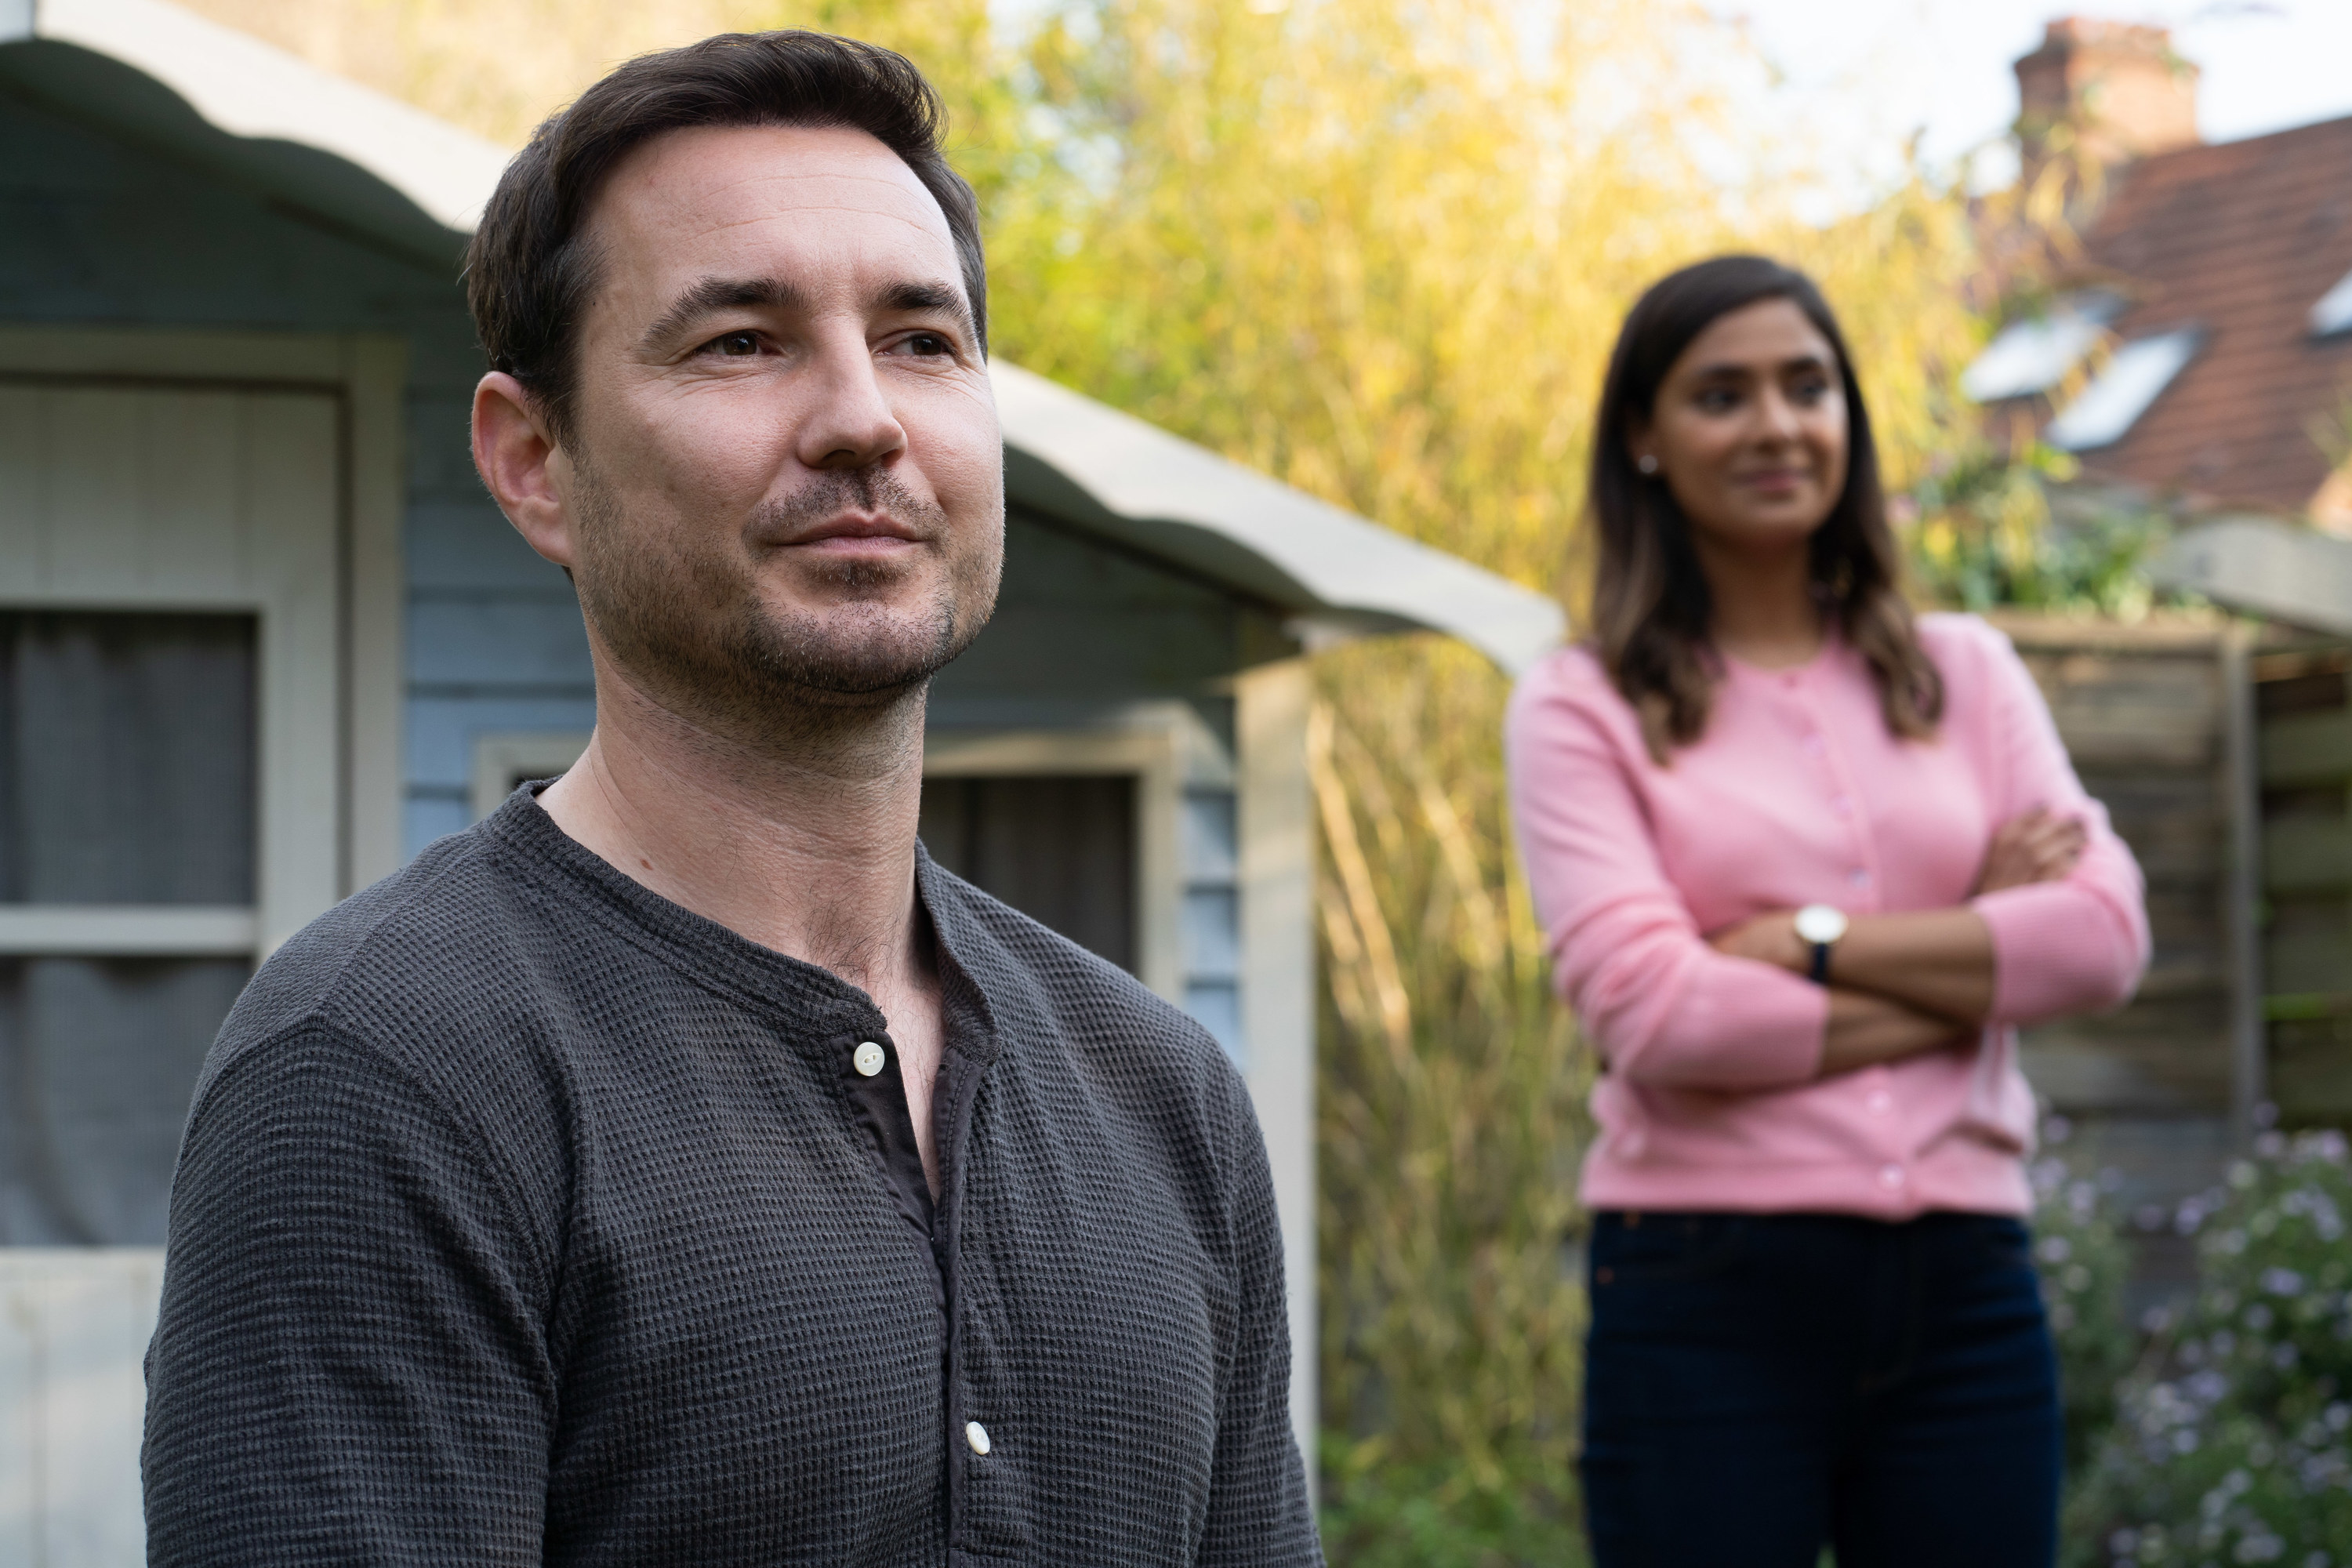 Martin Compston as Bram Lawson and Dinita Gohil as Lucy Vaughan standing in the garden, both with wry smiles